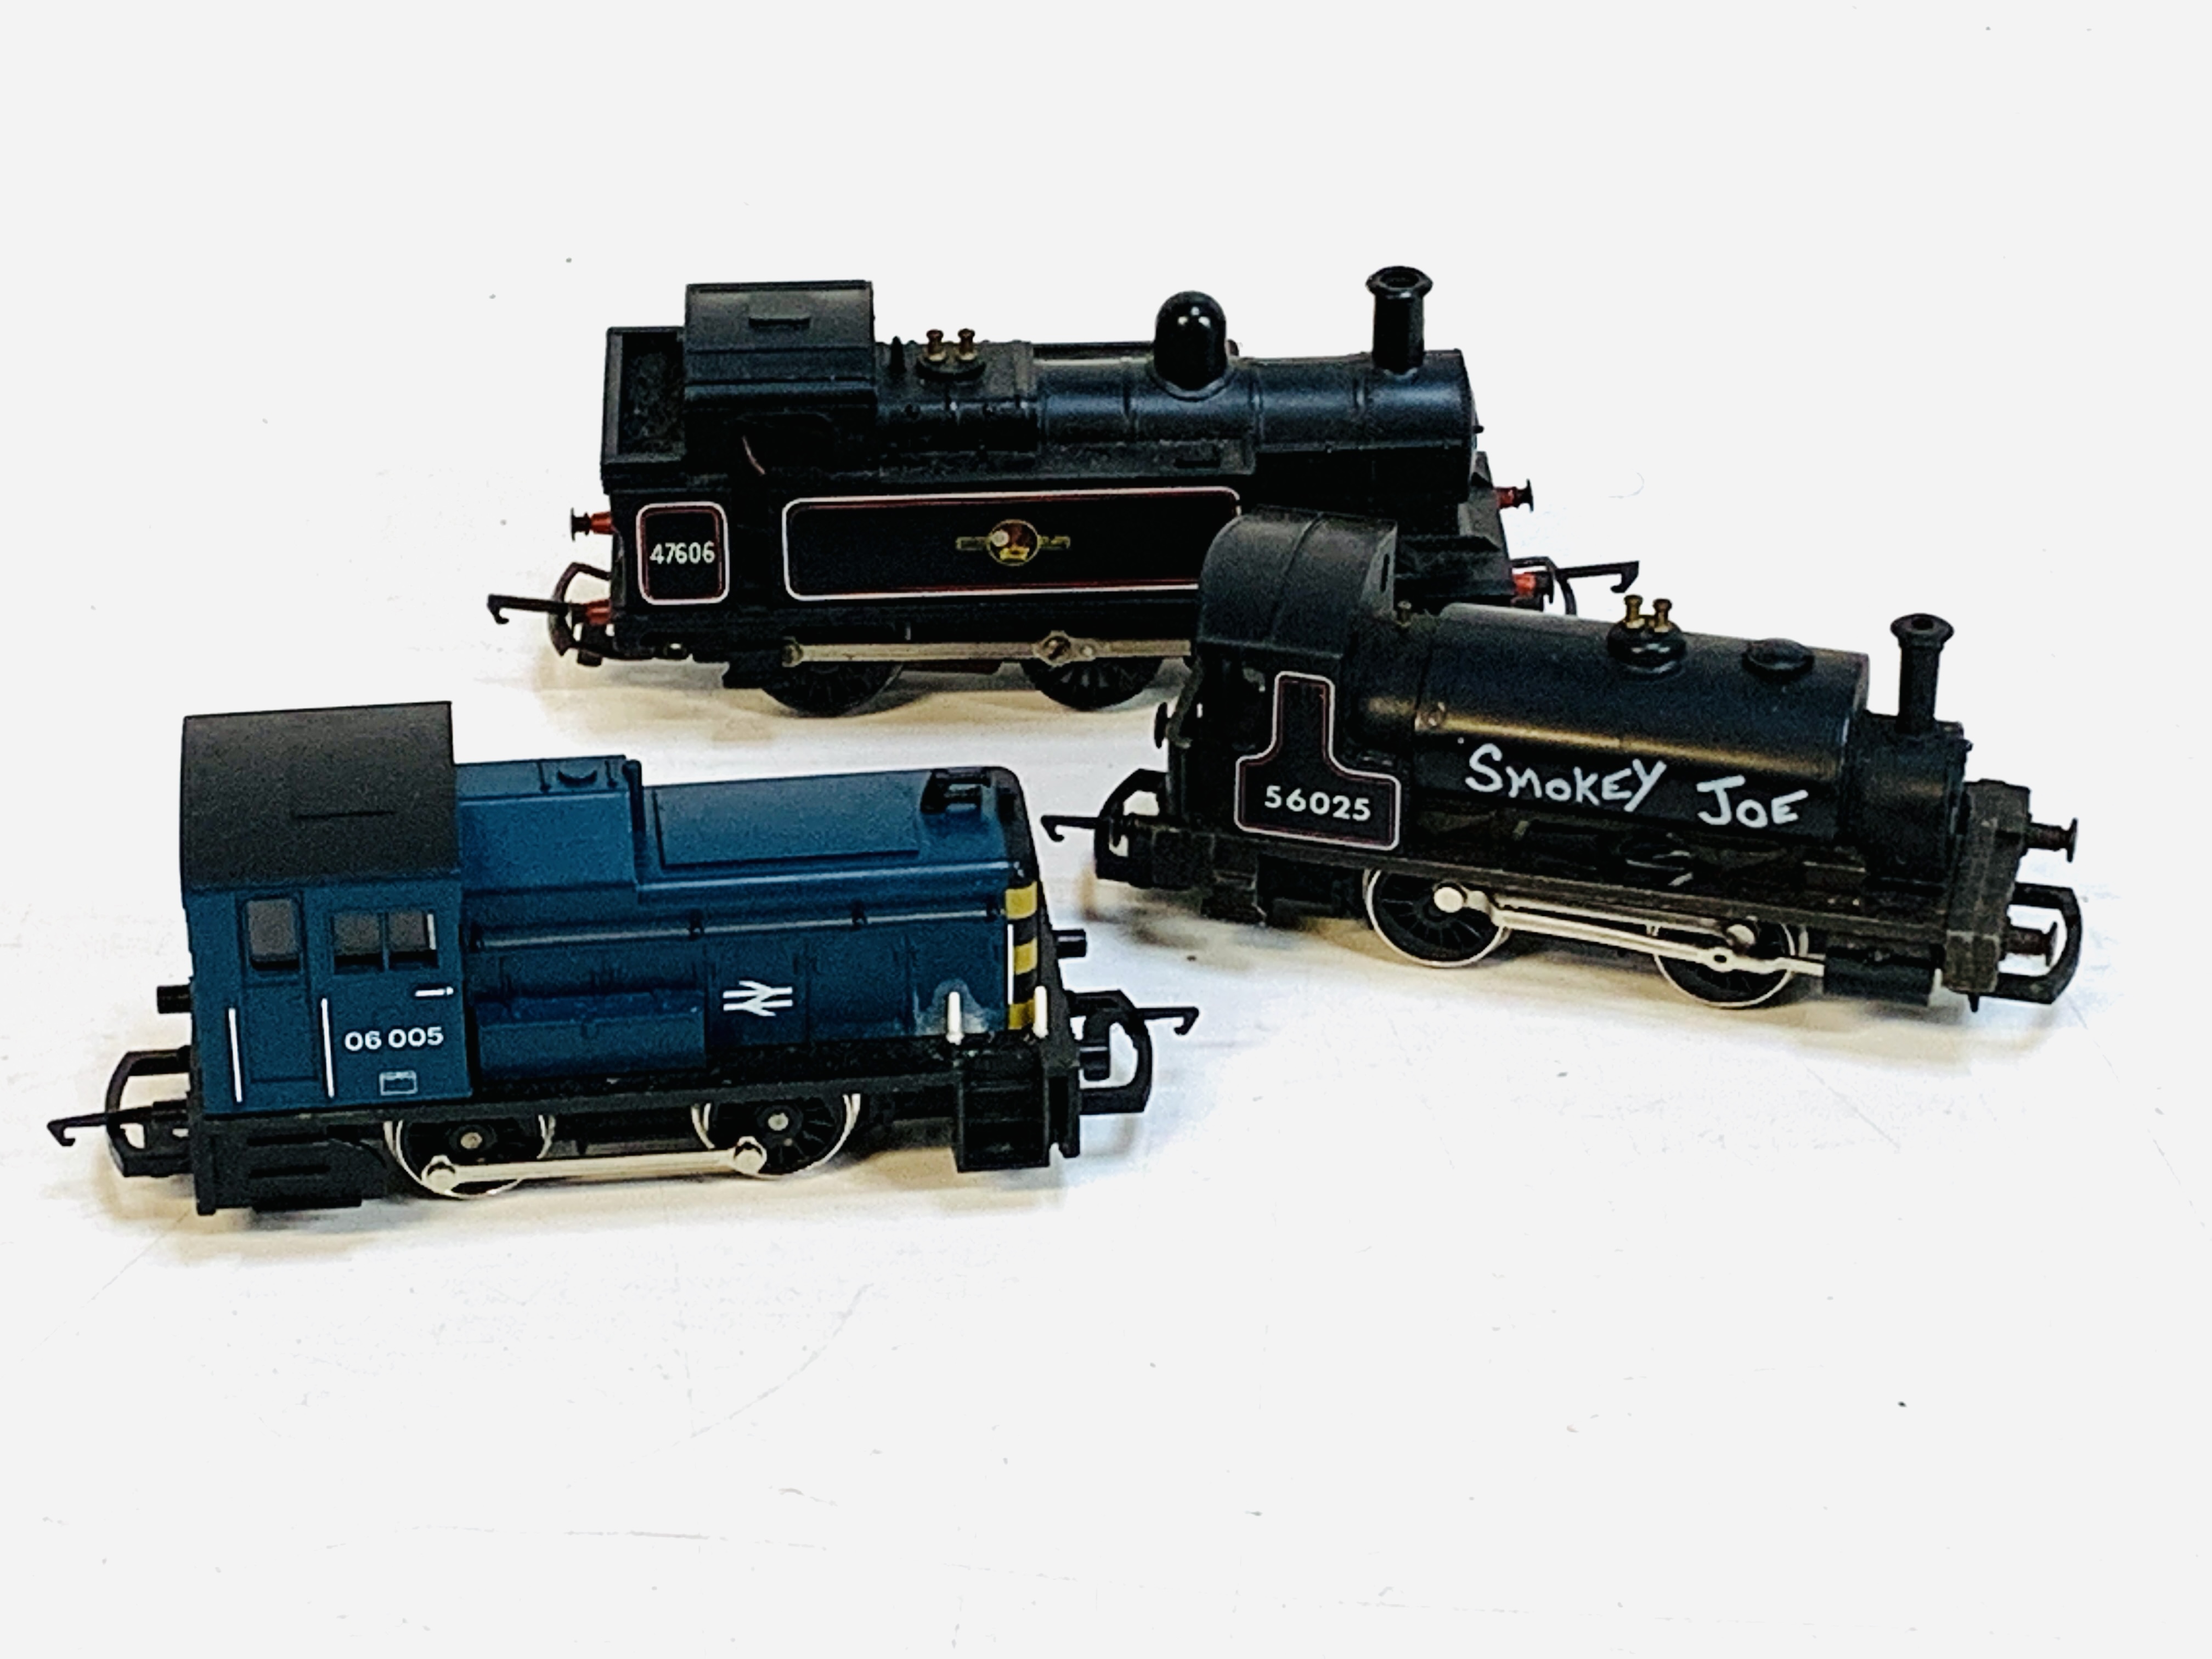 Three Tri-ang and Hornby tank engines